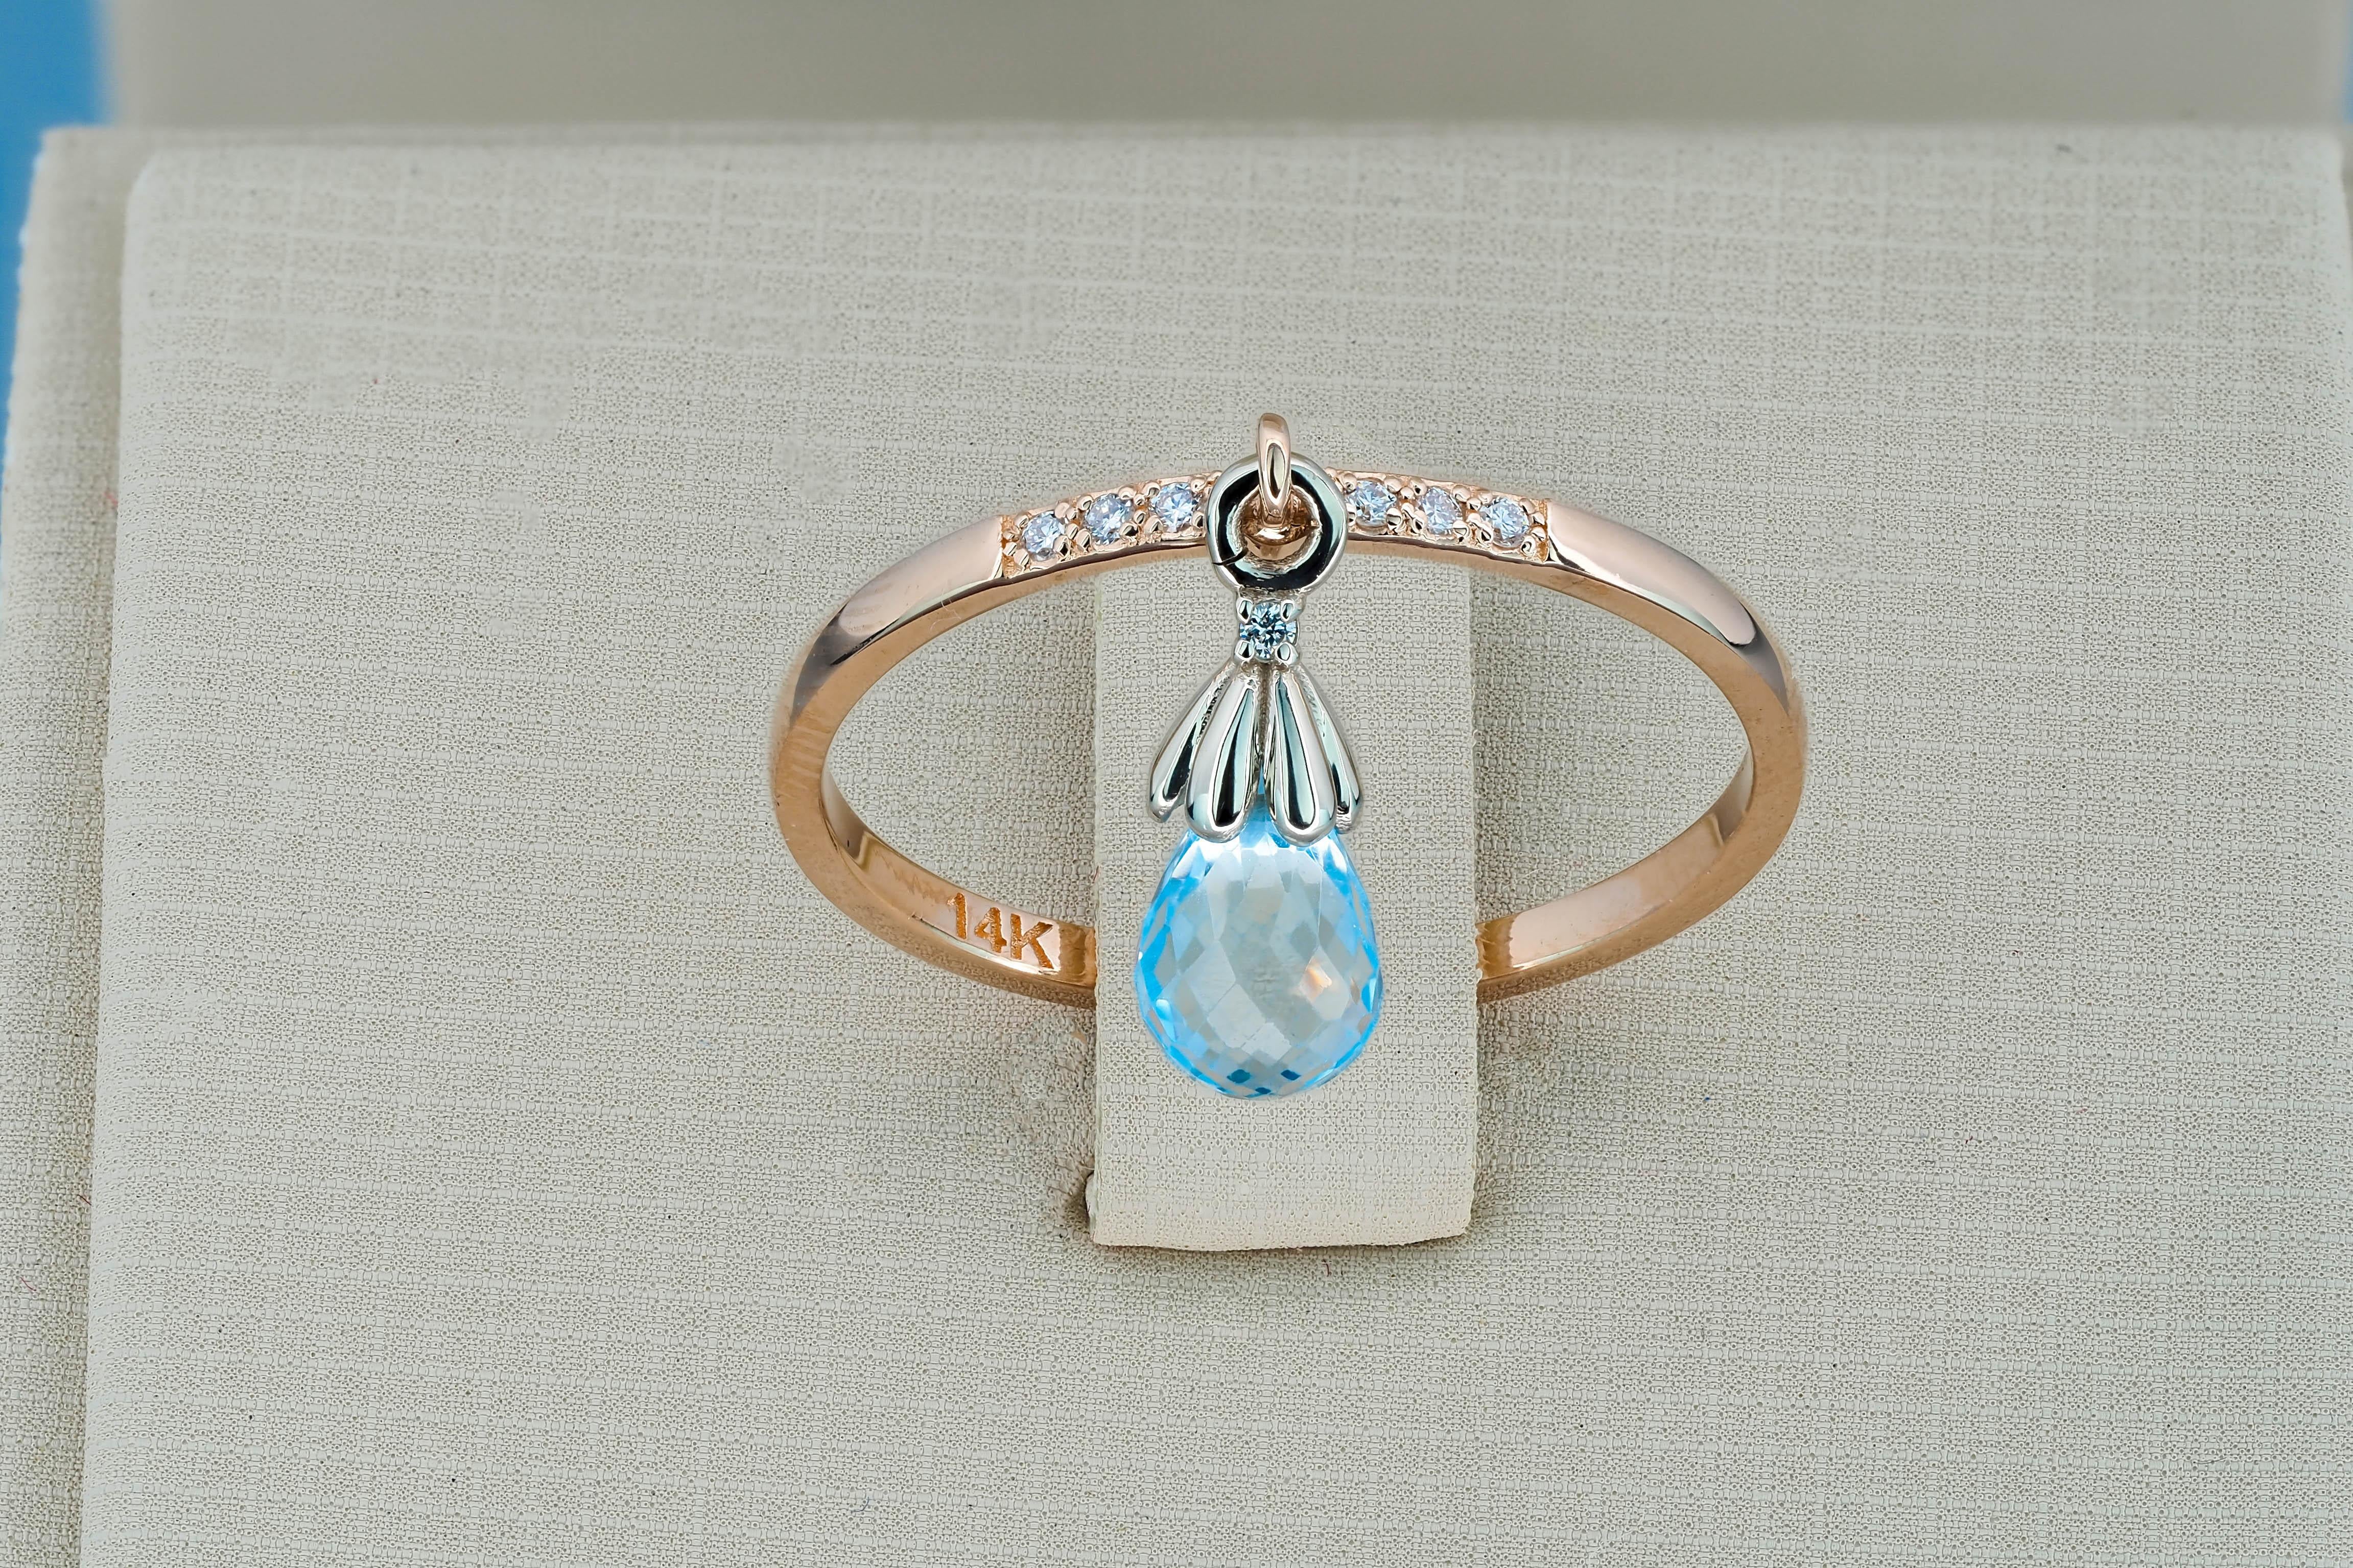 Topaz briolette 14k gold ring. 
Topaz tear drop ring. Sky blue topaz ring. Tiny topaz ring. Casual ring with topaz. November birthstone ring.

Metal: 14k gold
Weight: 1.6 g. depends from size.

Central stone: topaz
Cut: briolette
Color: